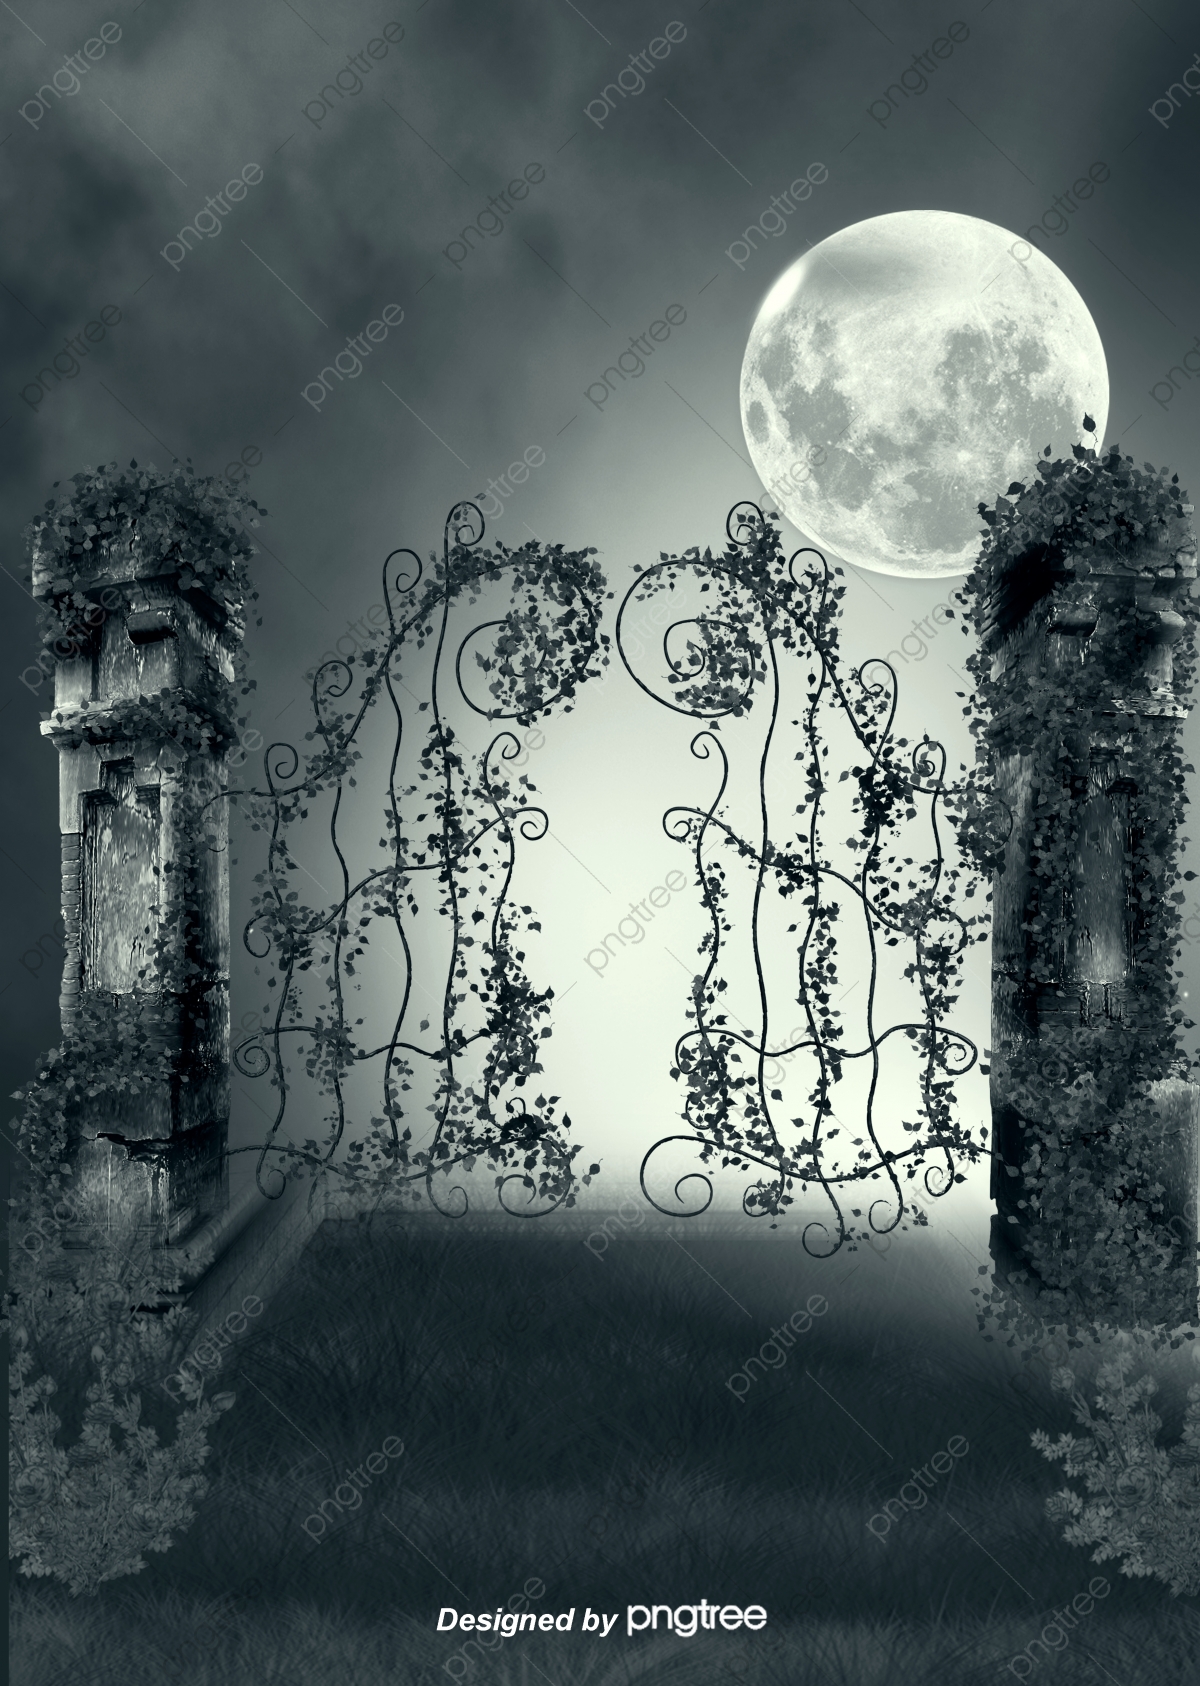 Cool Gothic Backgrounds